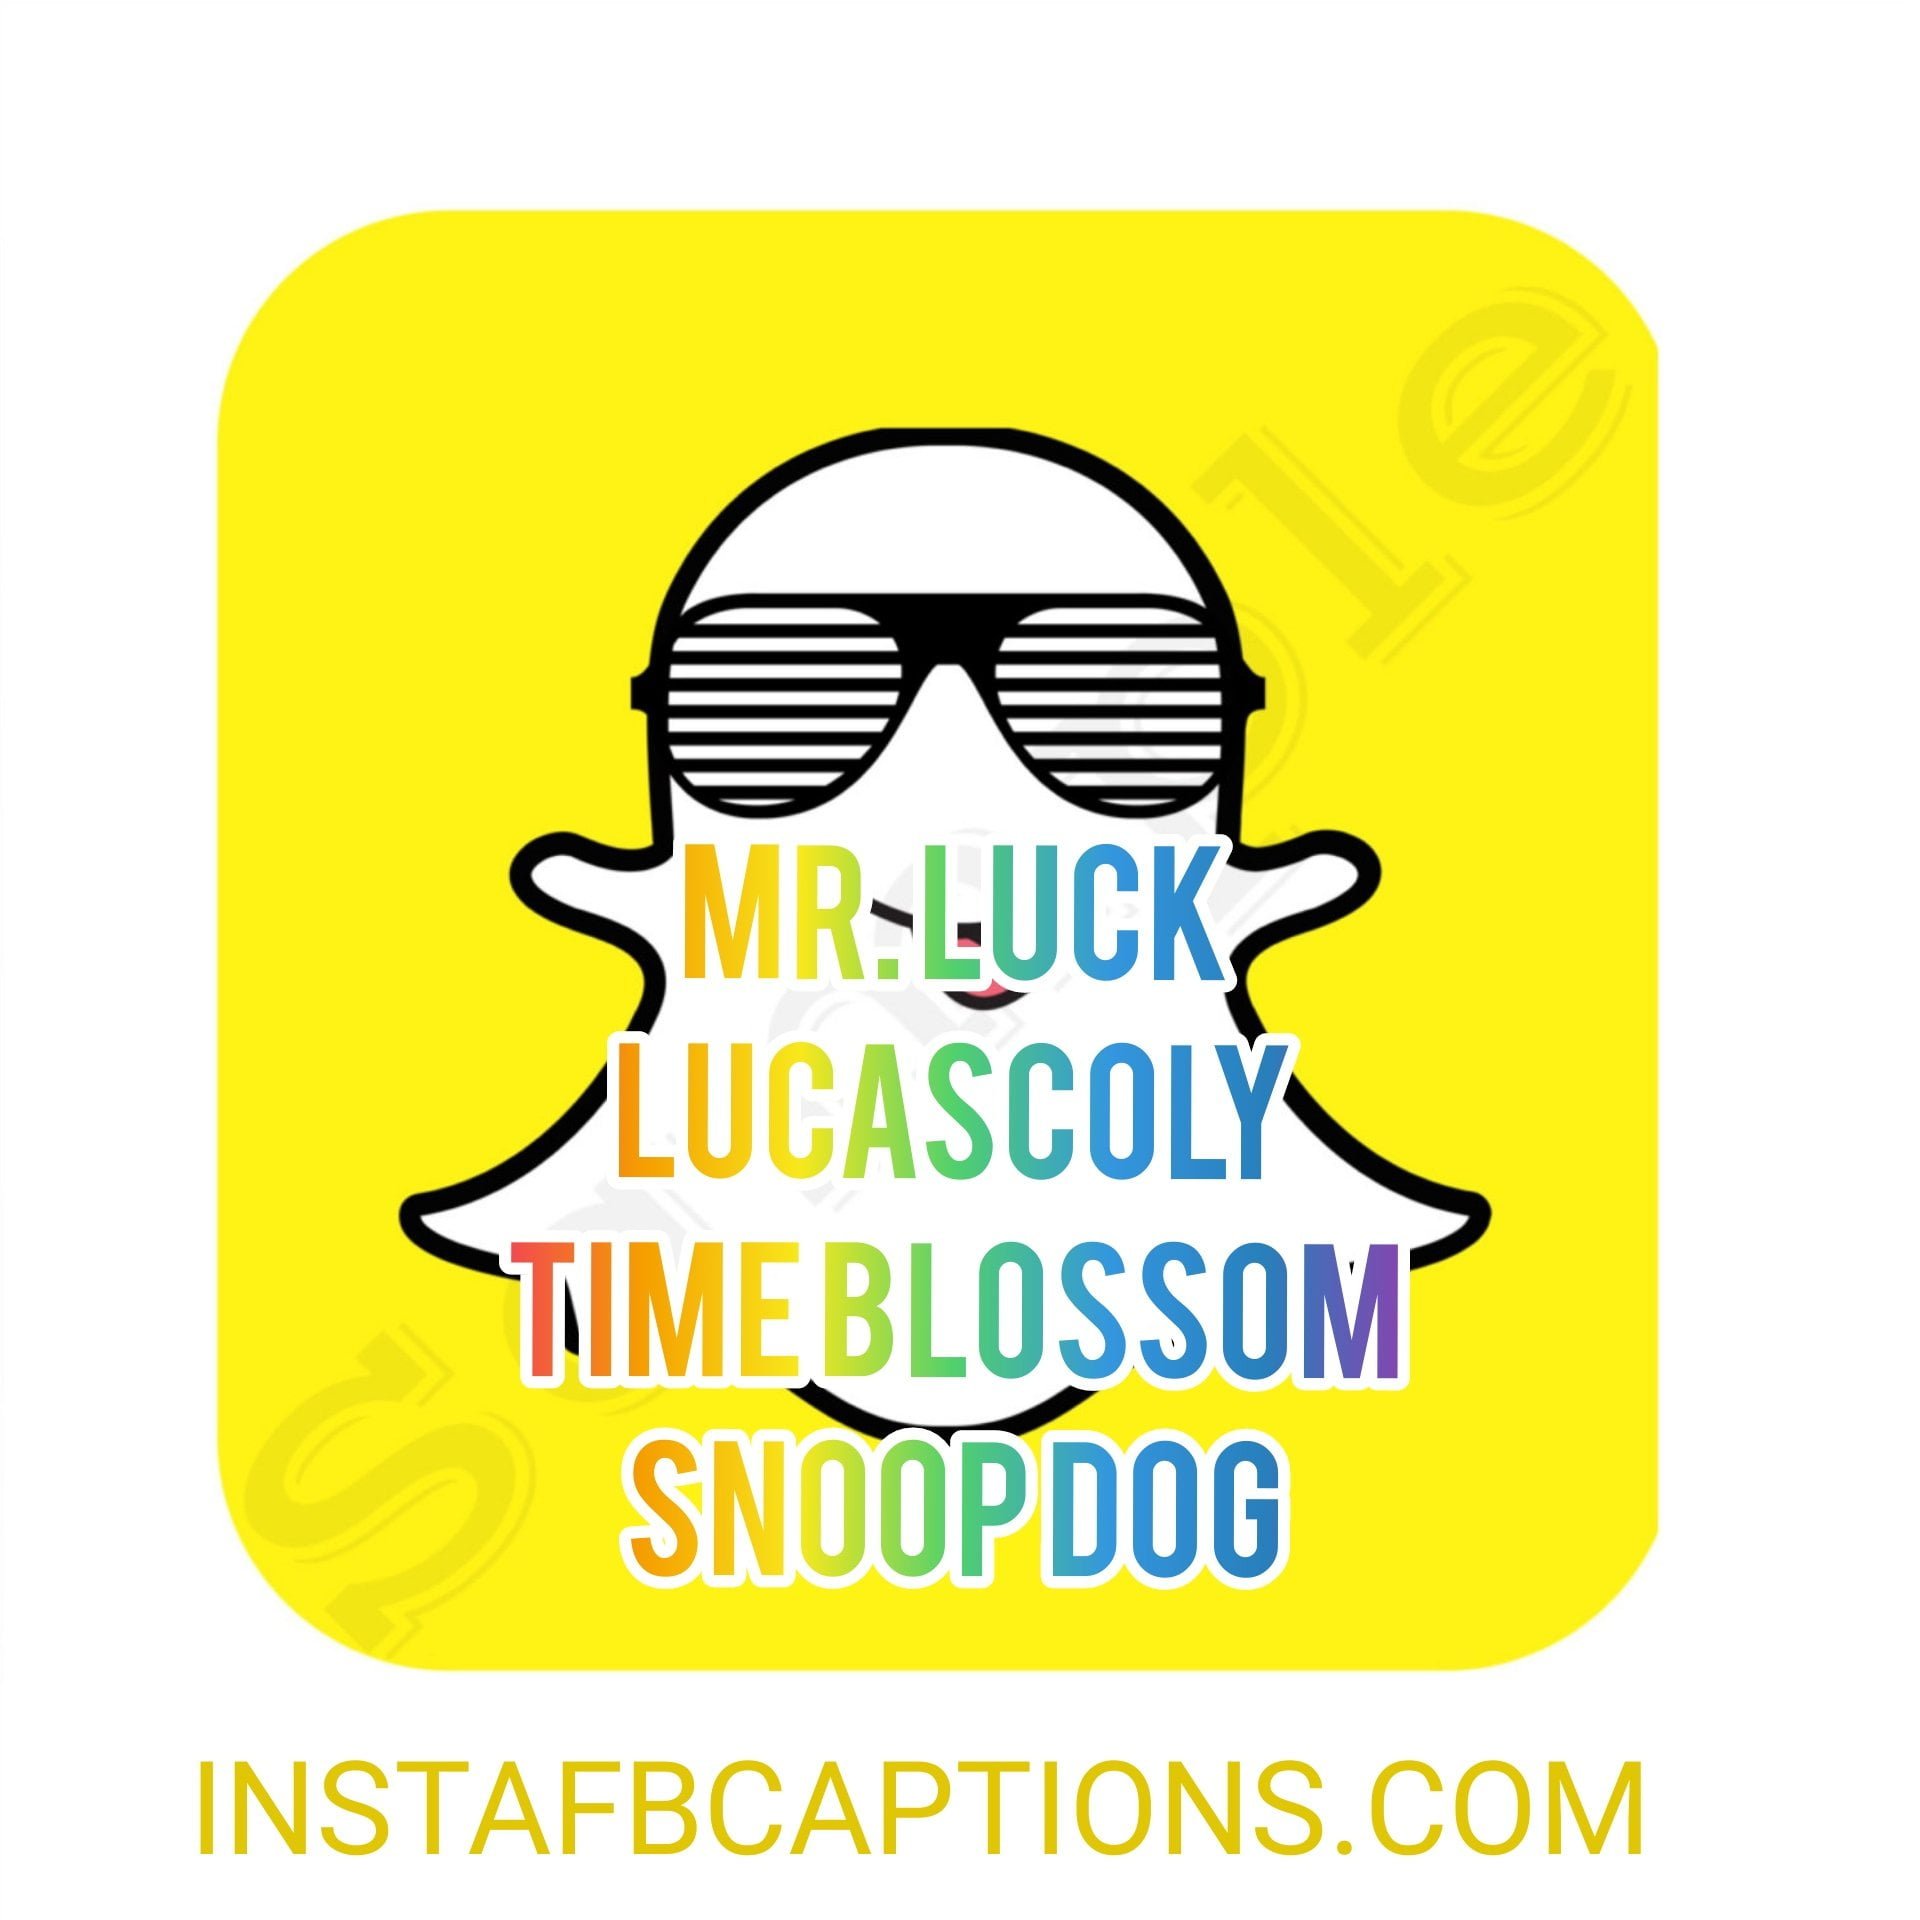 Cool Snapchat Names  - Cool snapchat names - 750+ Best SNAPCHAT NAME IDEAS for Guys &amp; Girls 2022